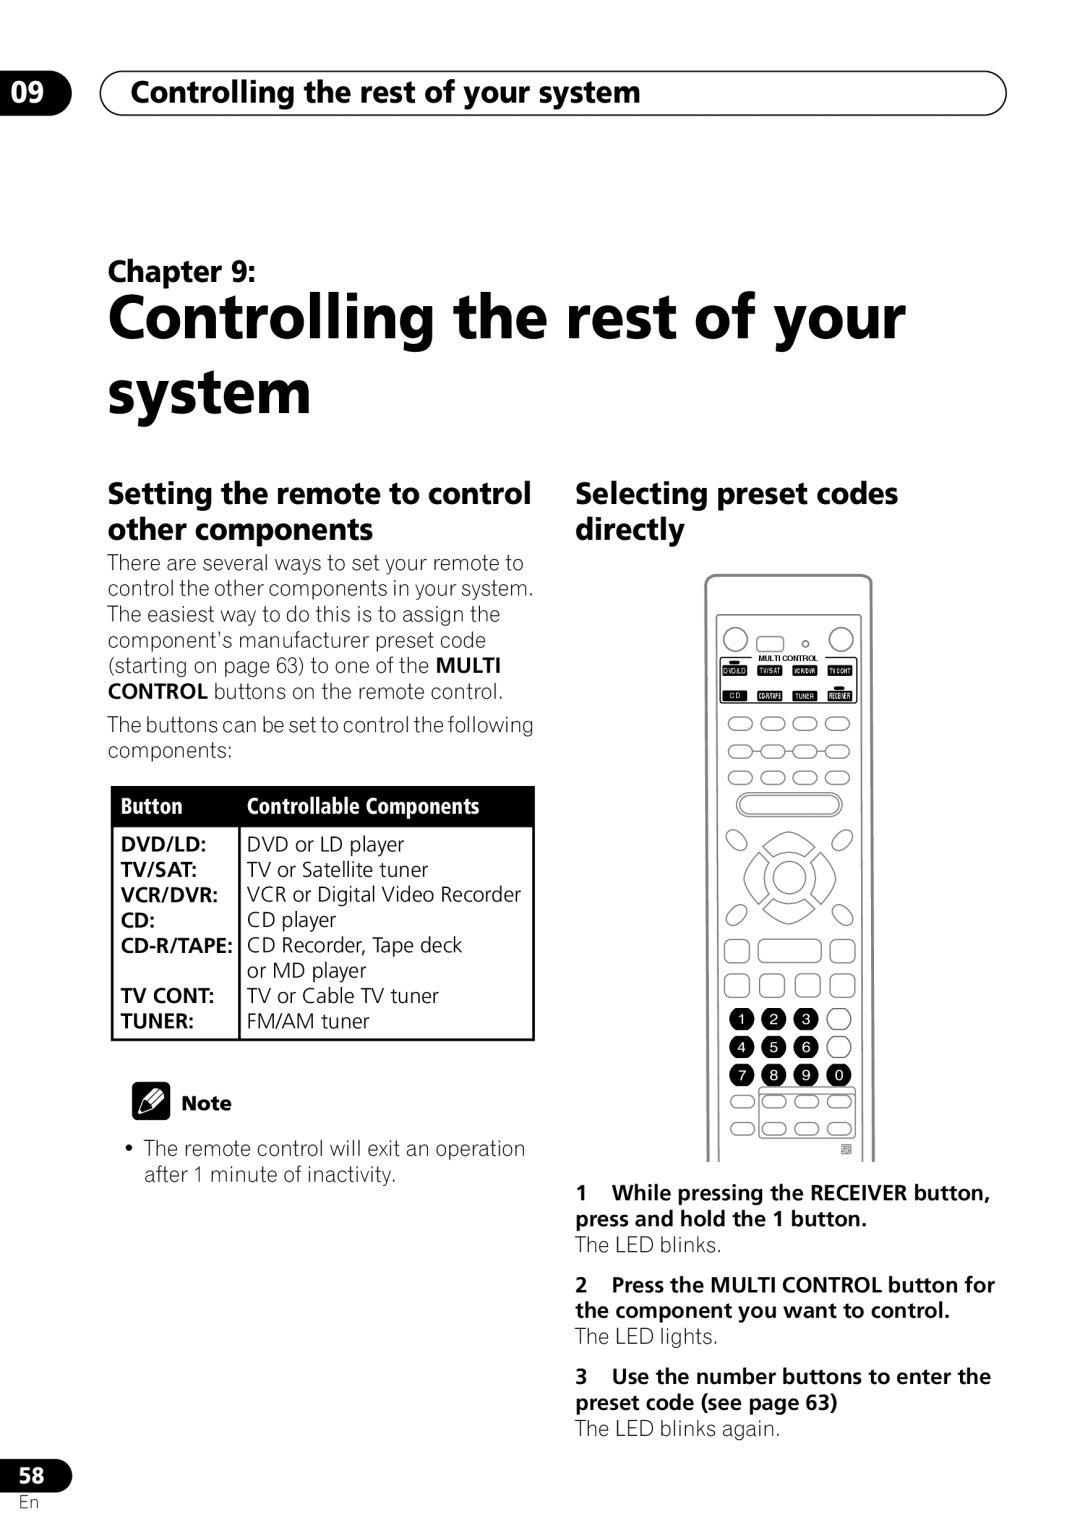 Pioneer VSX-D712 09Controlling the rest of your system Chapter, Setting the remote to control other components, Button 